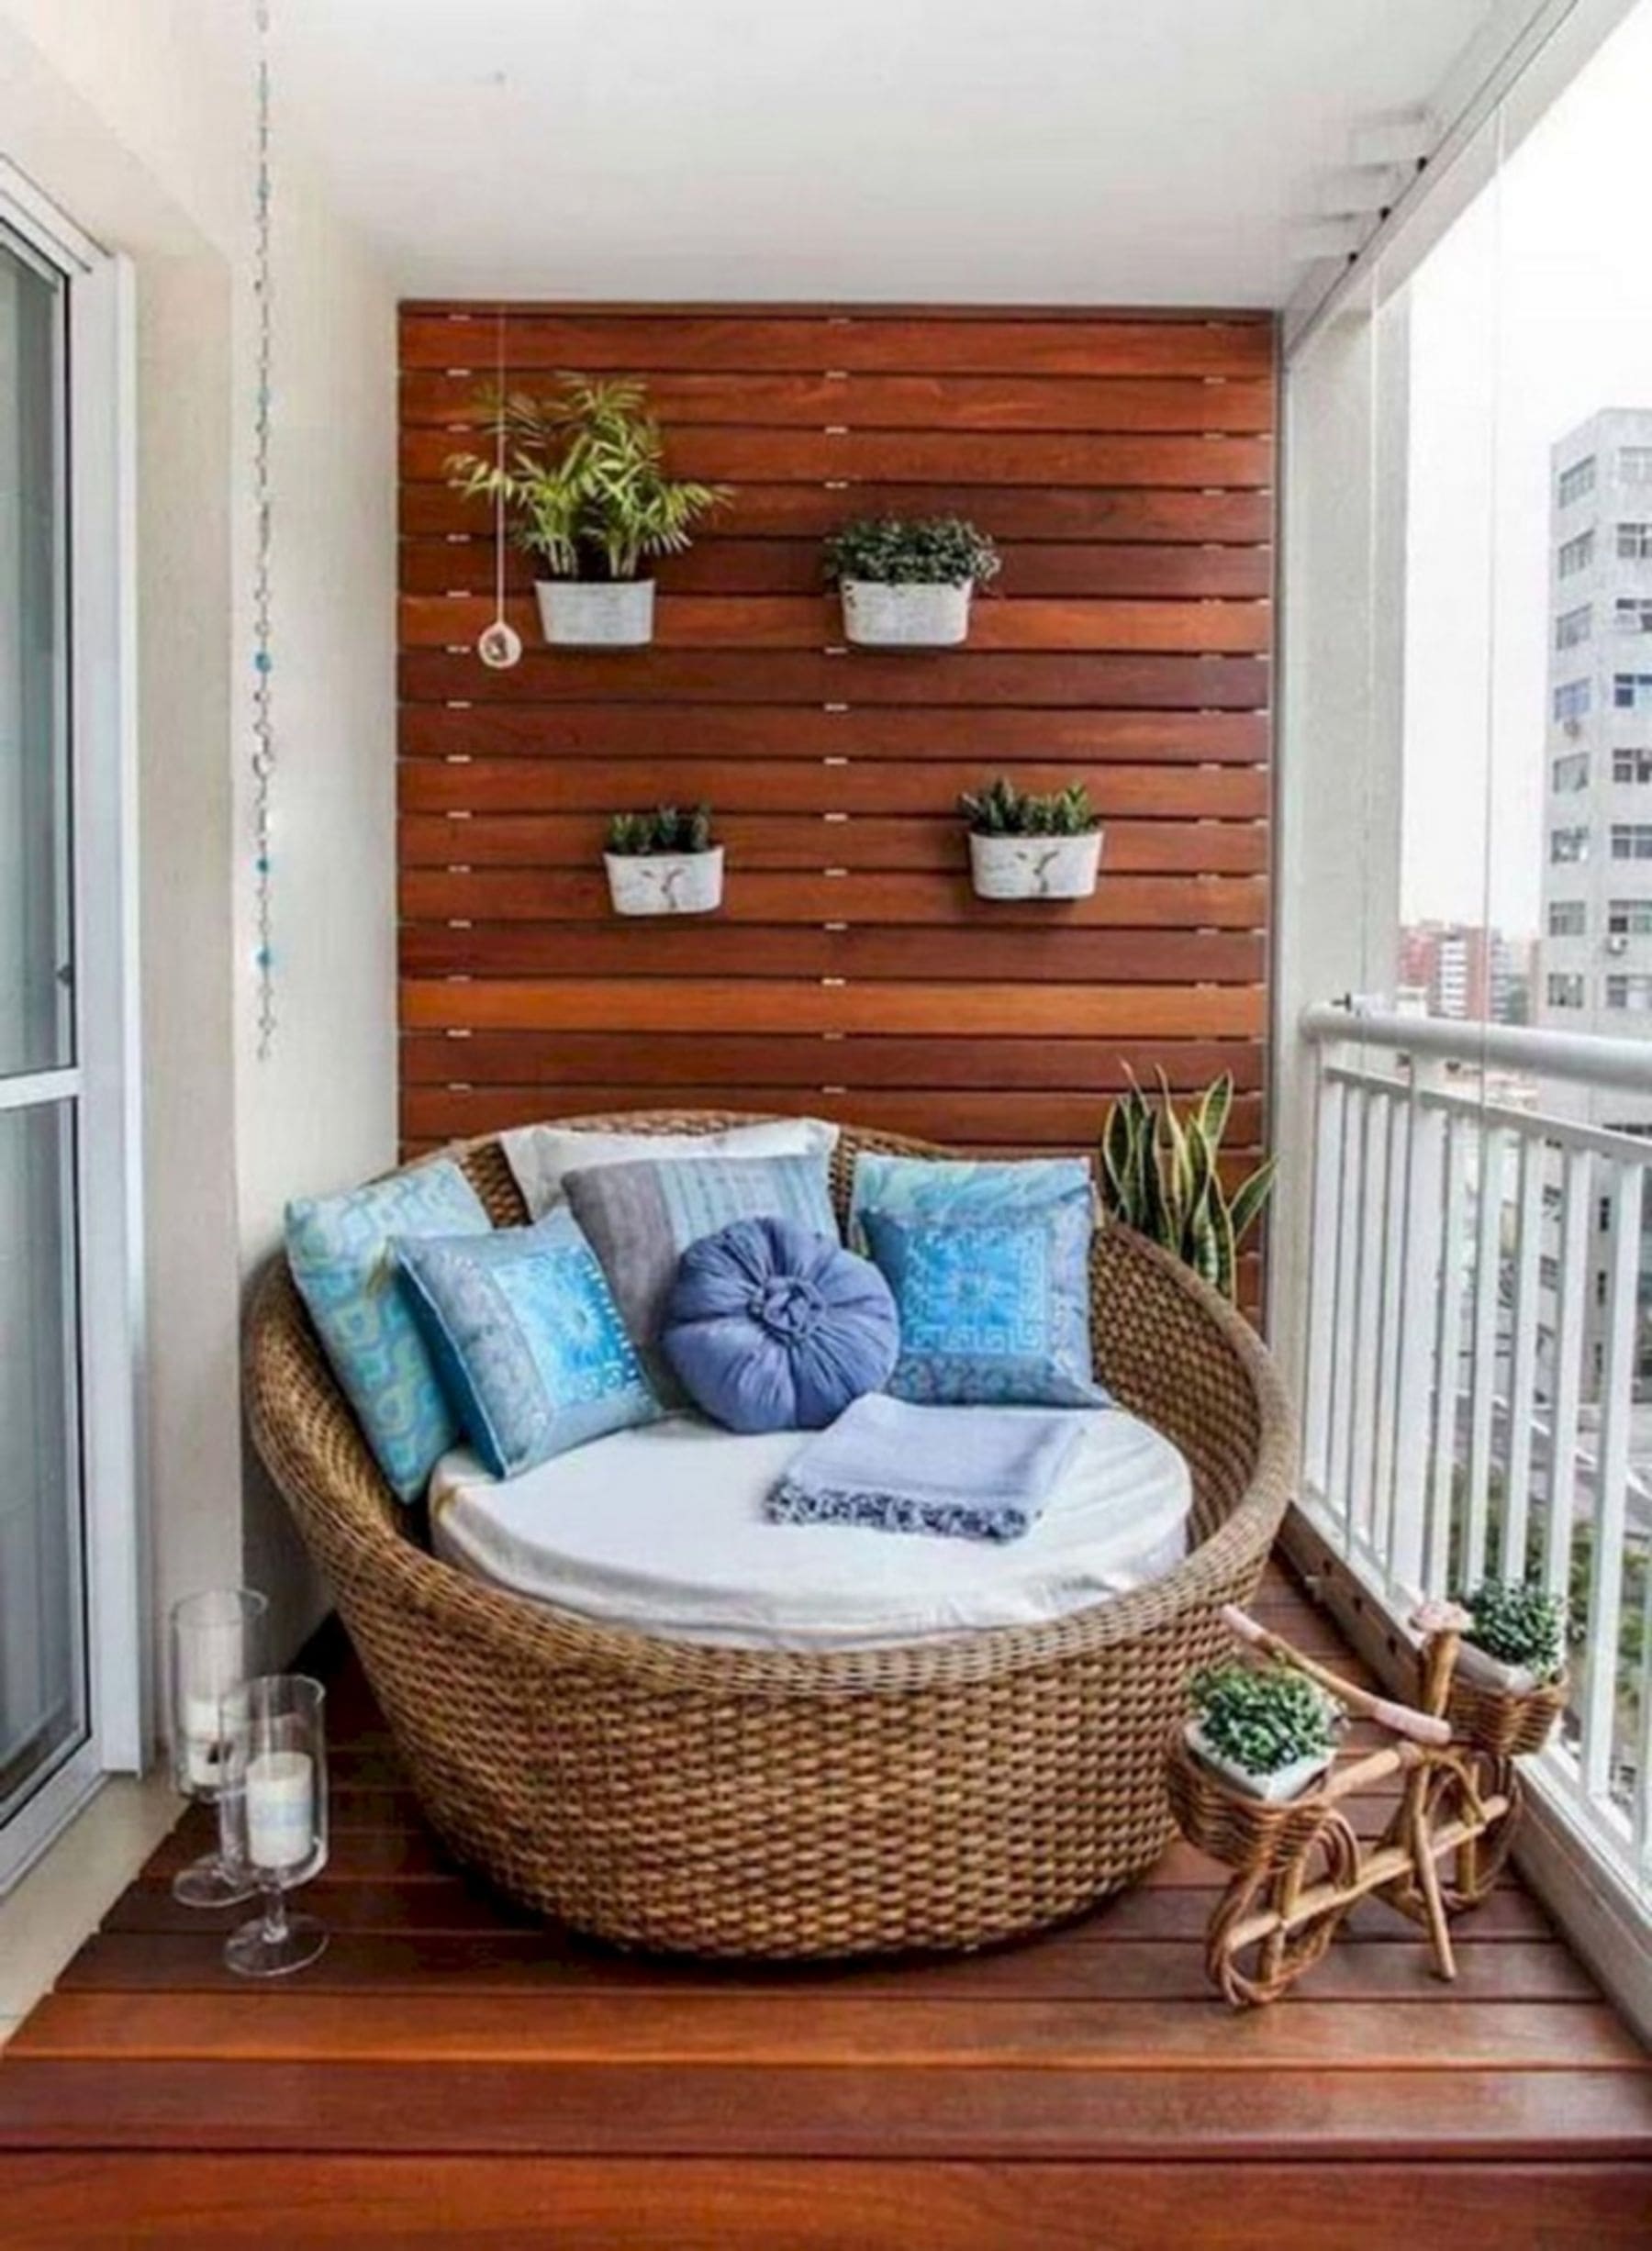 24 charming and cozy balcony garden ideas for your apartment - 77